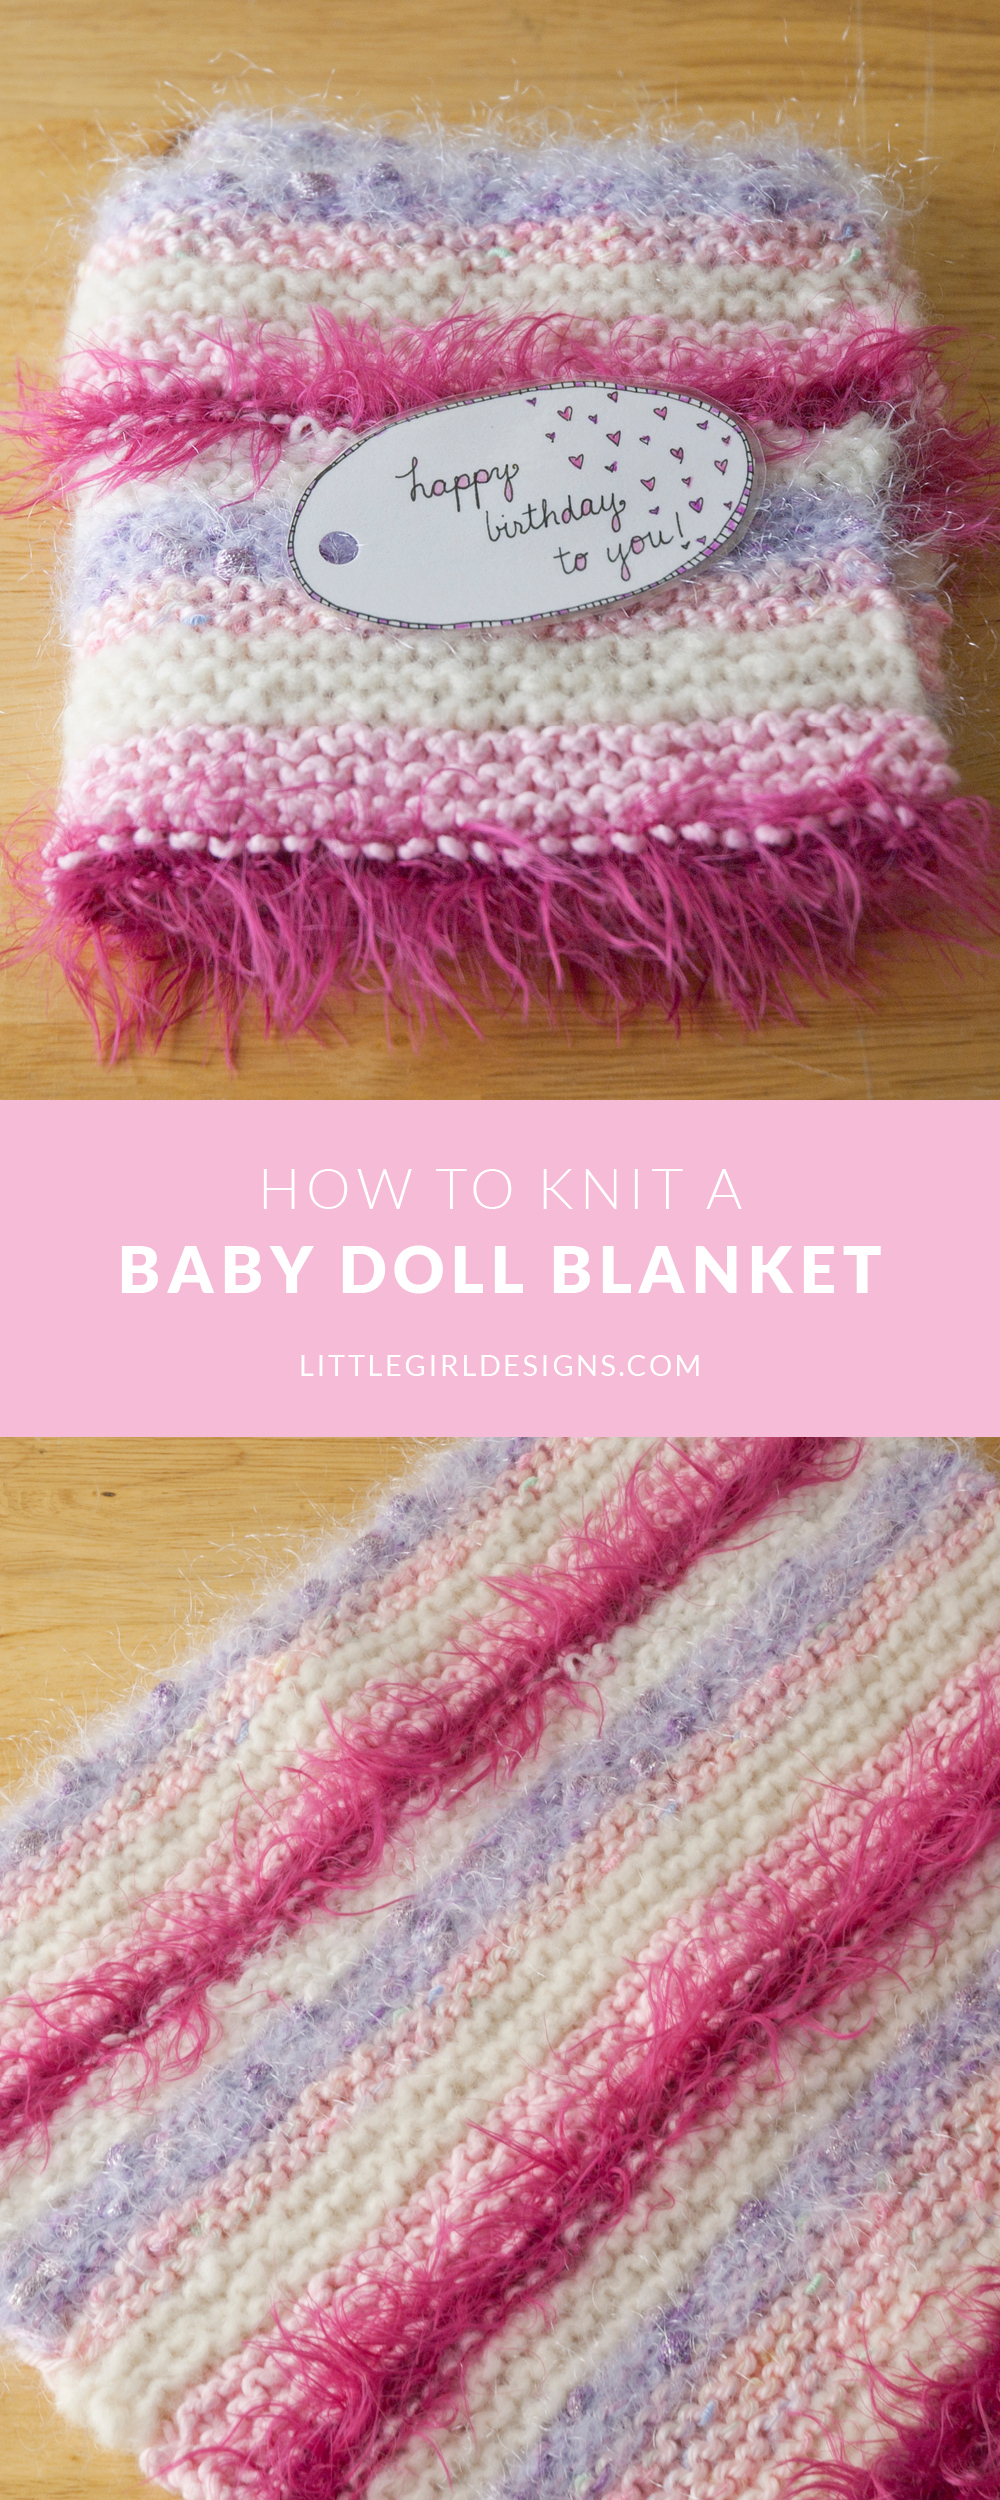 What a great idea! Here's an easy tutorial on how to knit a baby doll blanket using leftover yarn scraps.